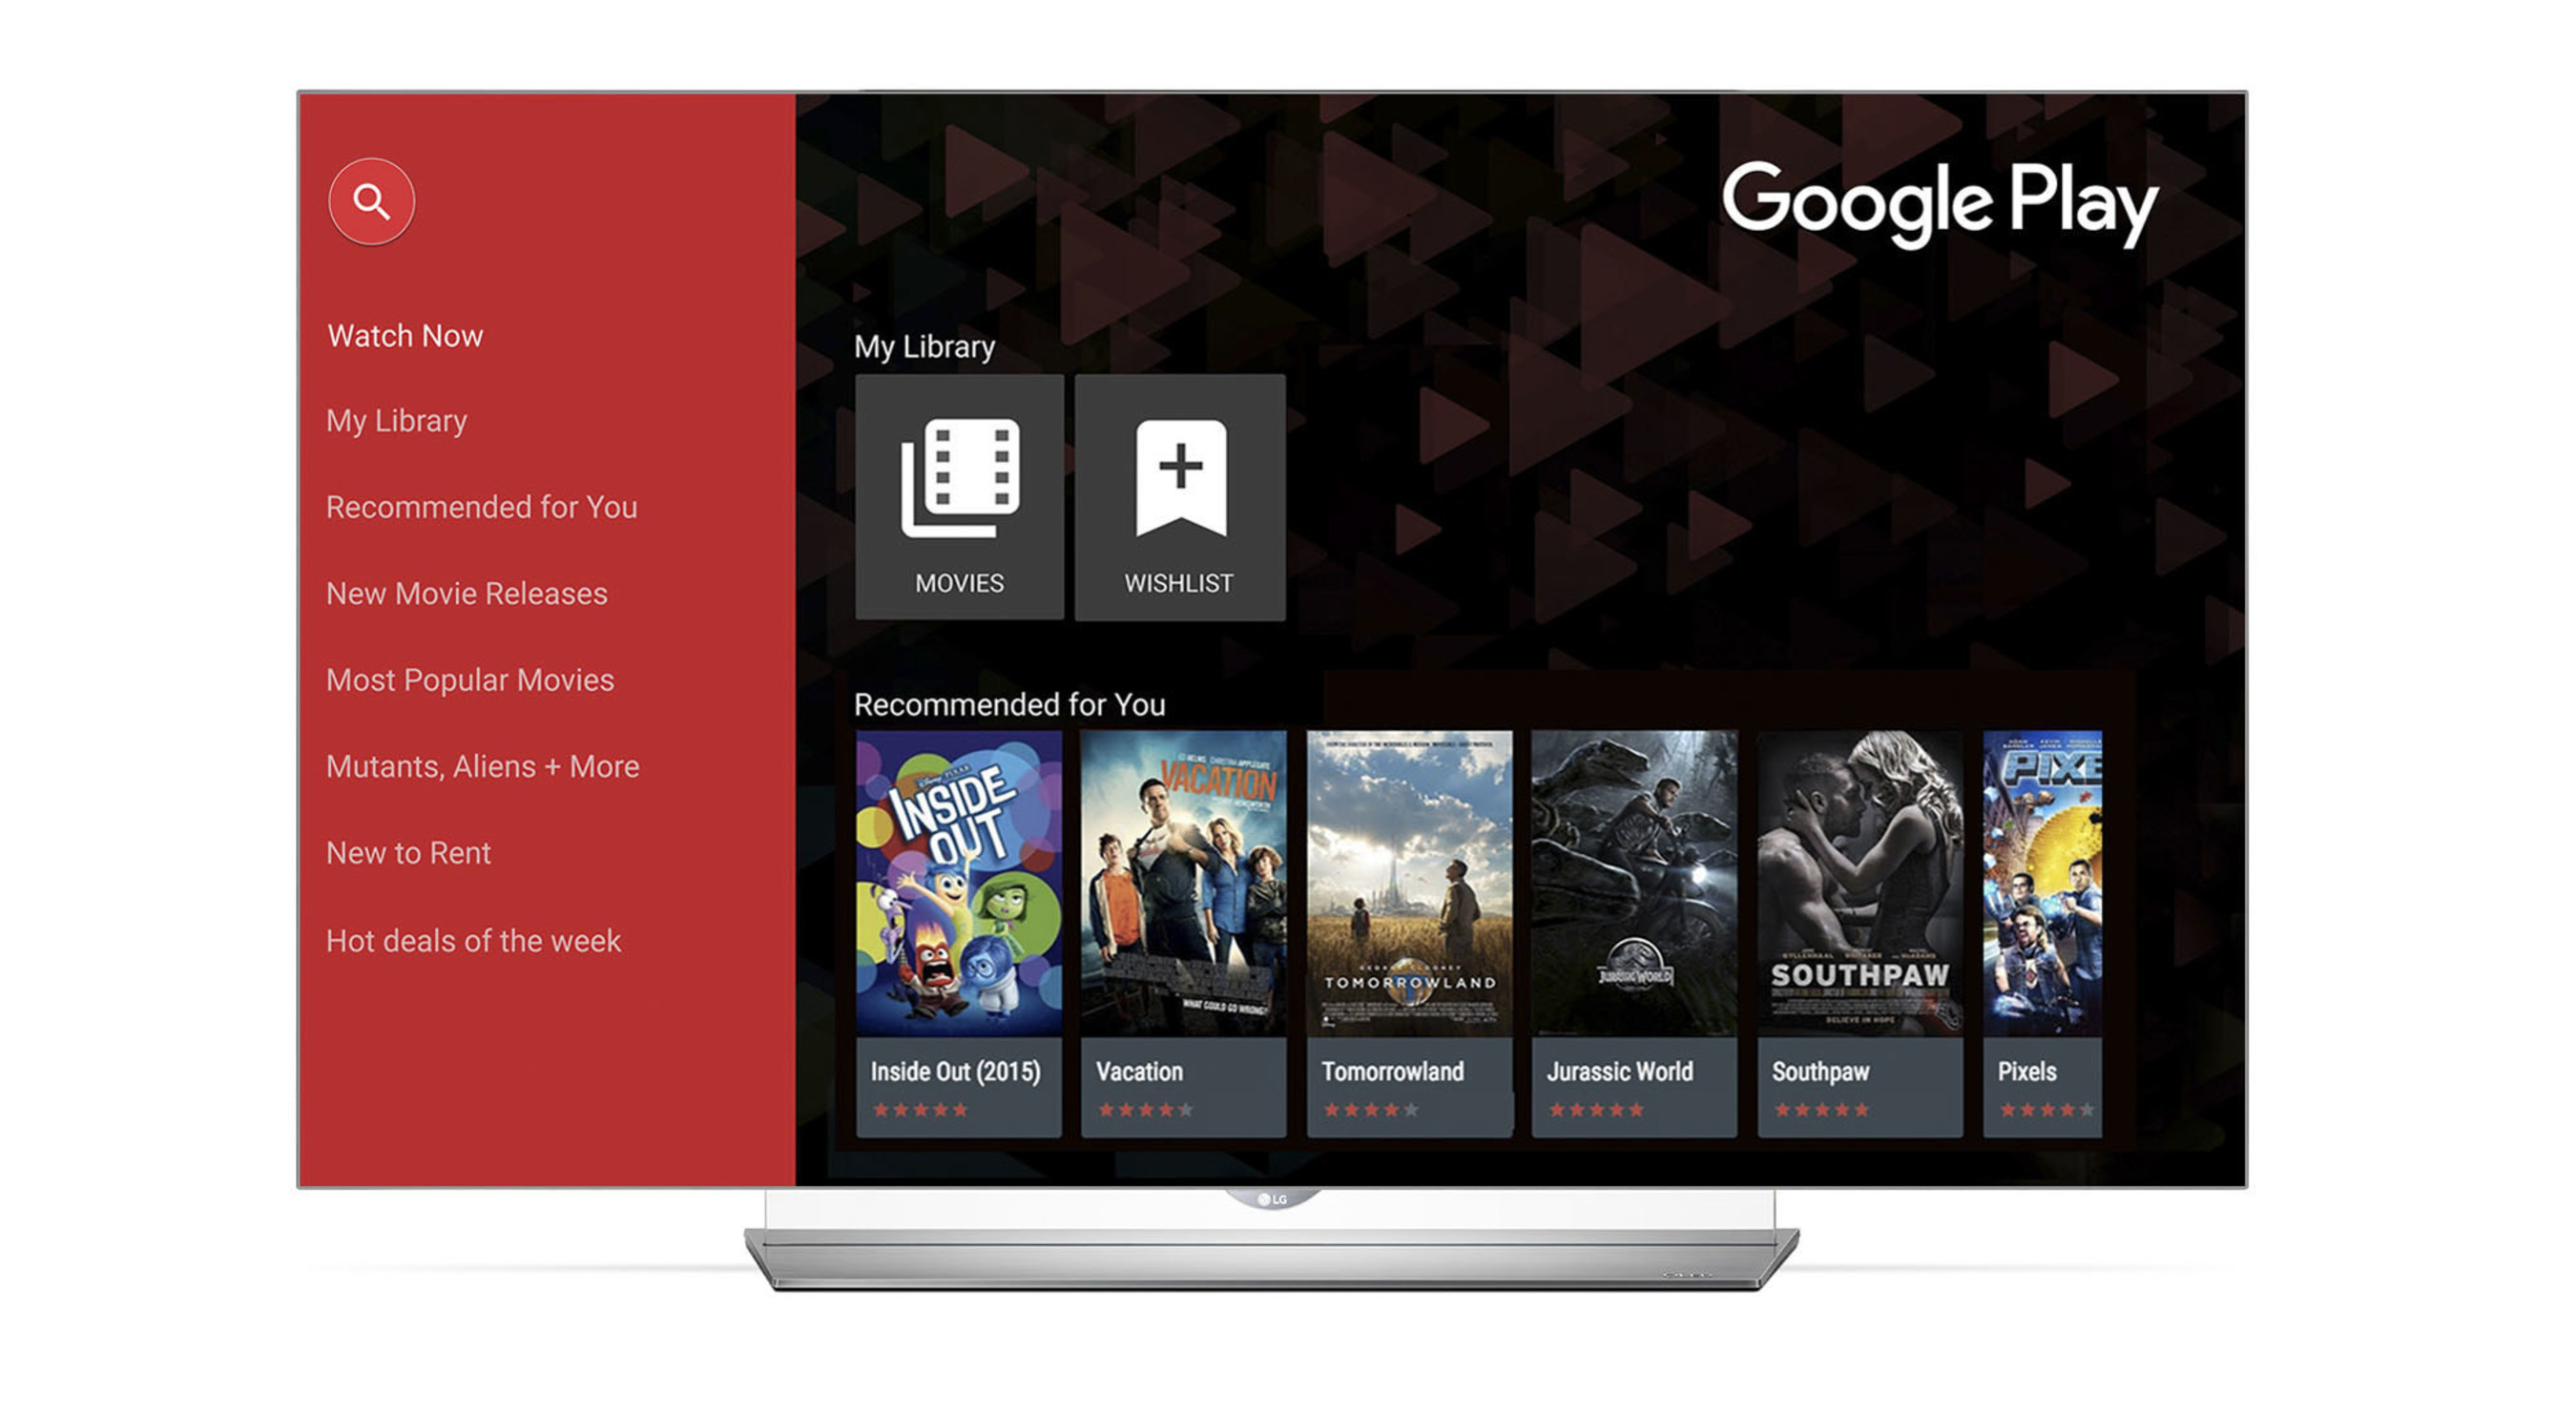 Starting this month, U.S. owners of LG Smart TVs will be able to enjoy thousands of movies and TV shows through "Google Play Movies & TV."